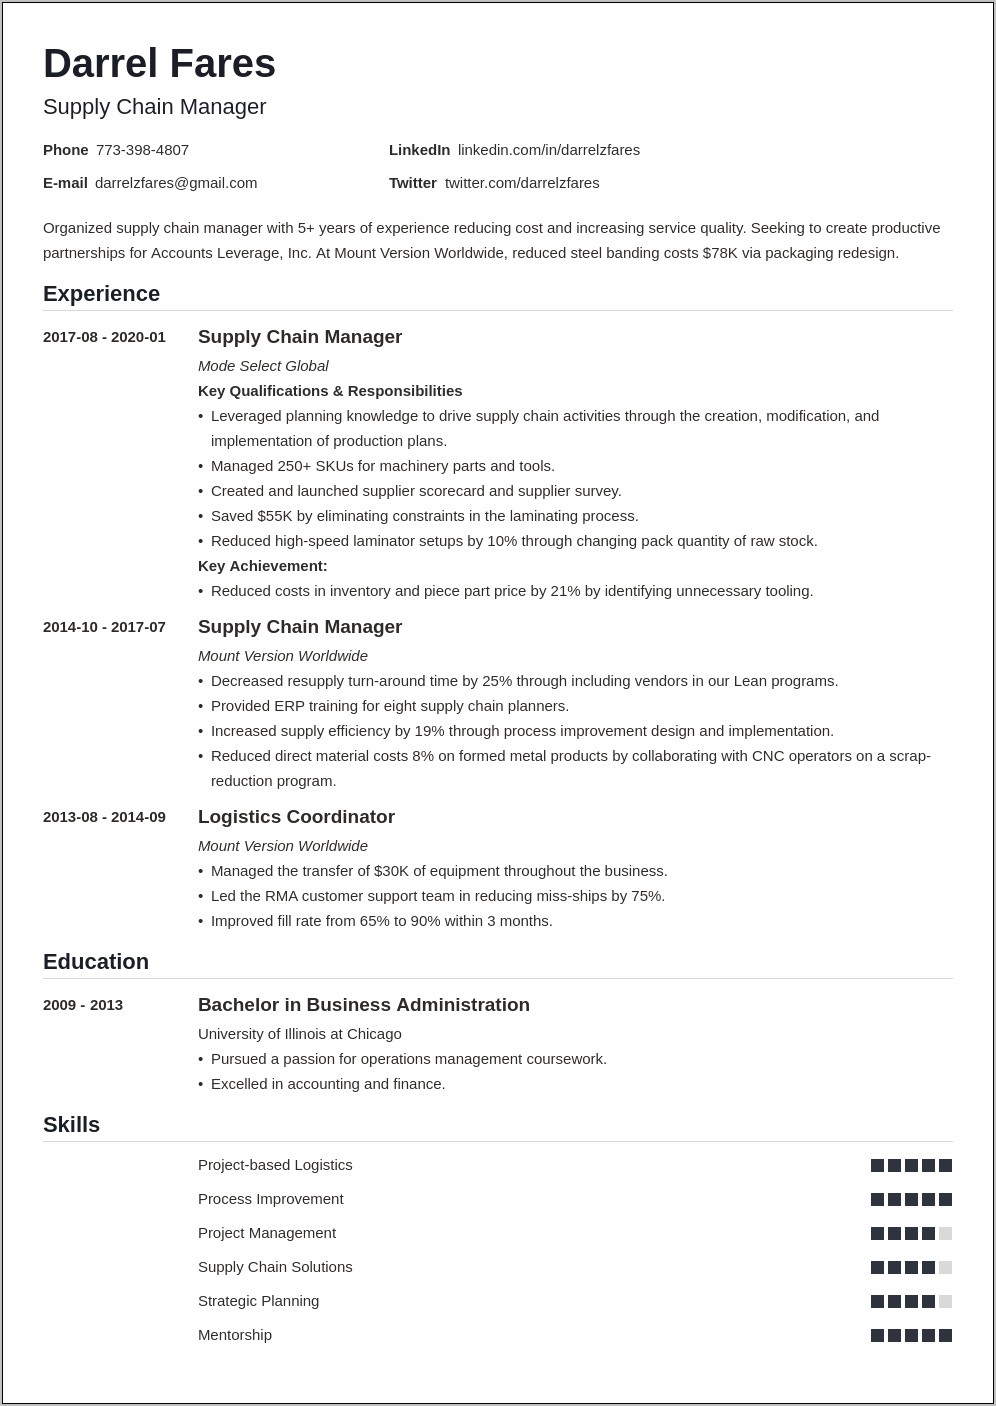 Supply Chain Management Professional Resume